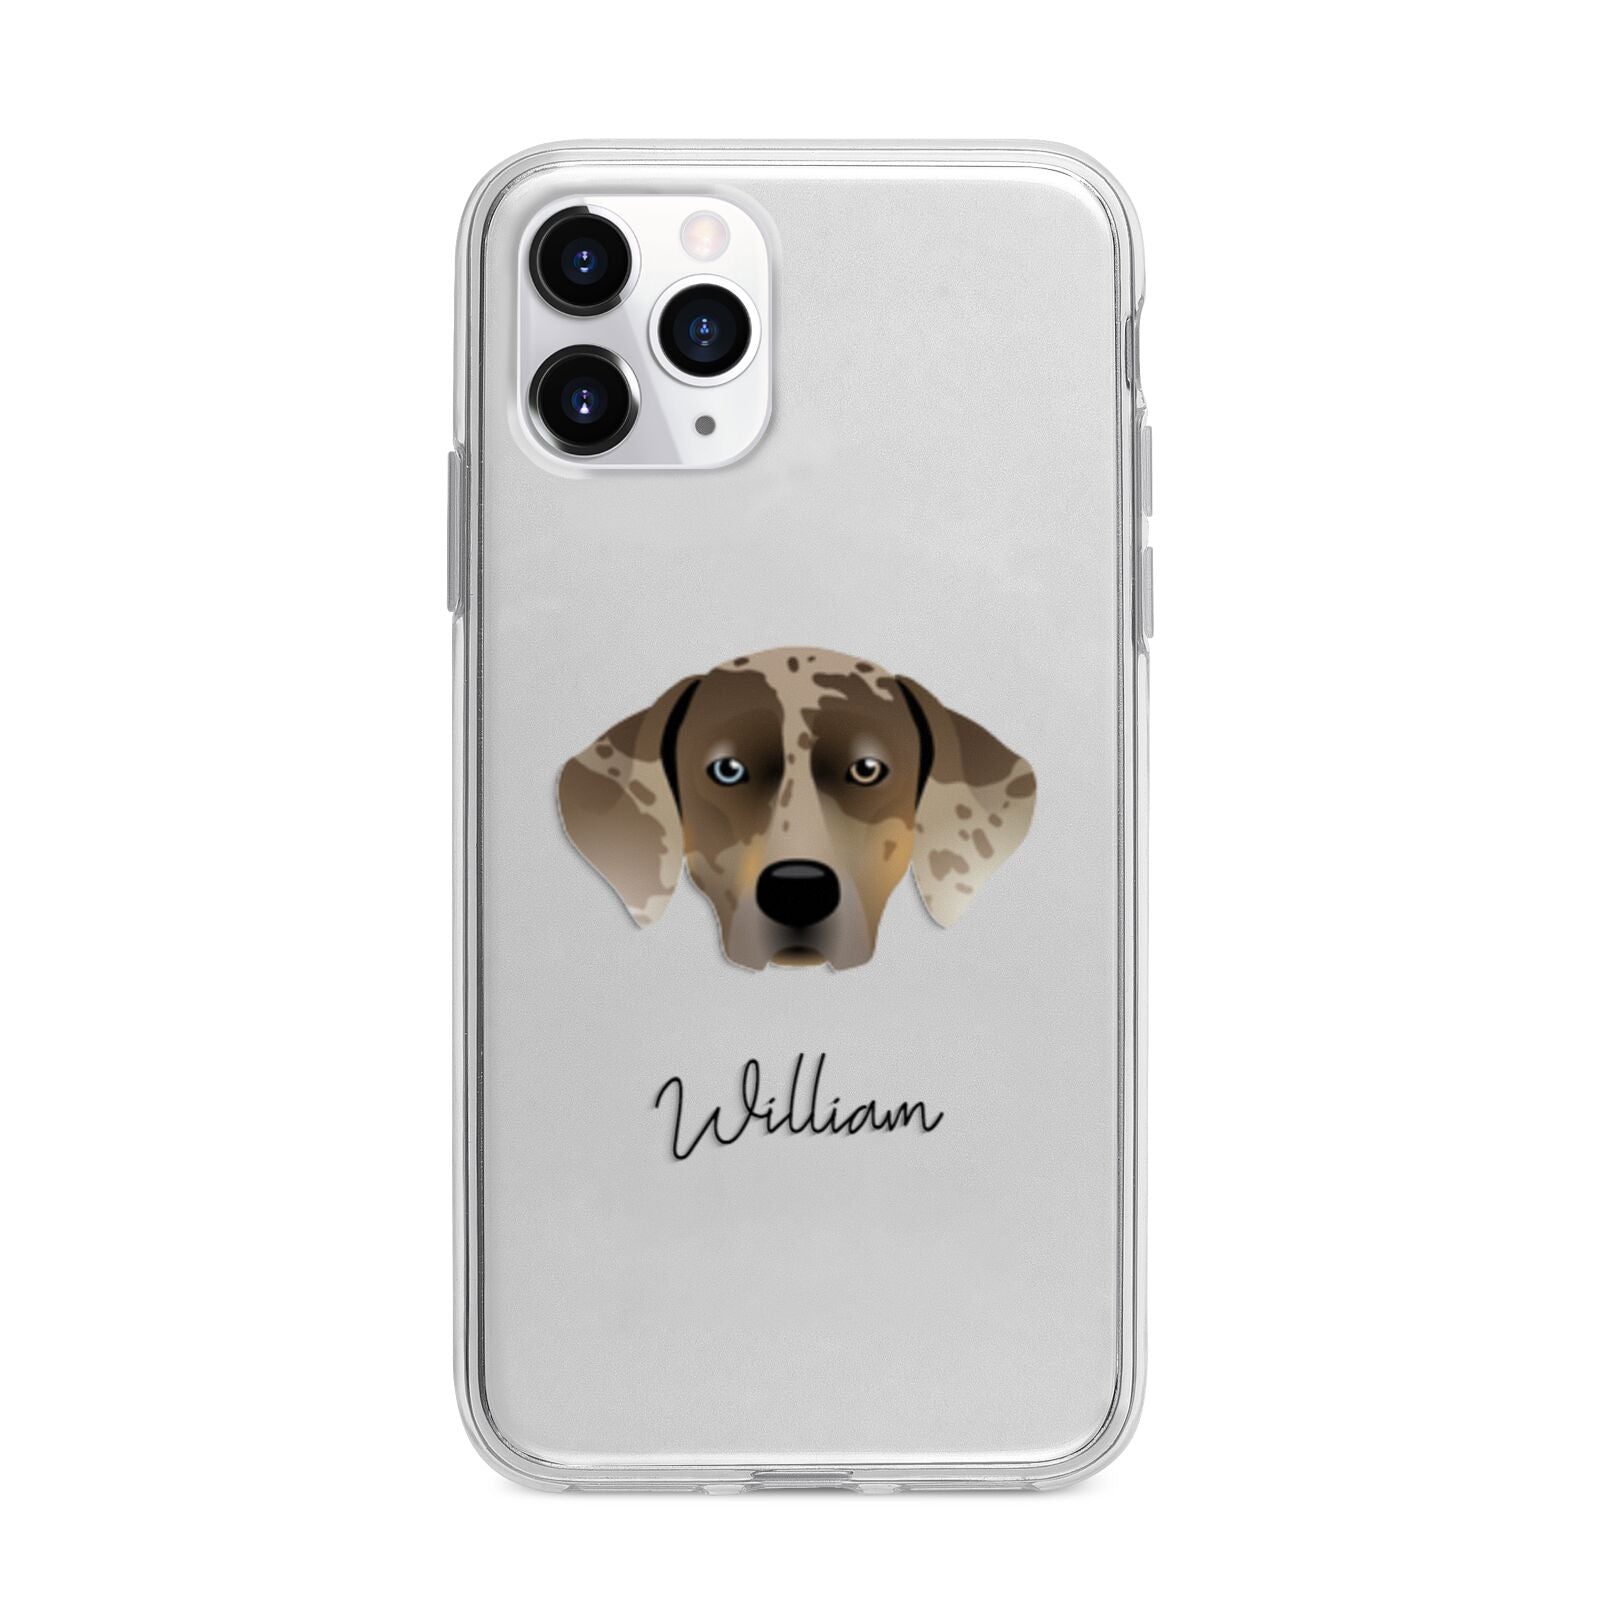 Catahoula Leopard Dog Personalised Apple iPhone 11 Pro in Silver with Bumper Case